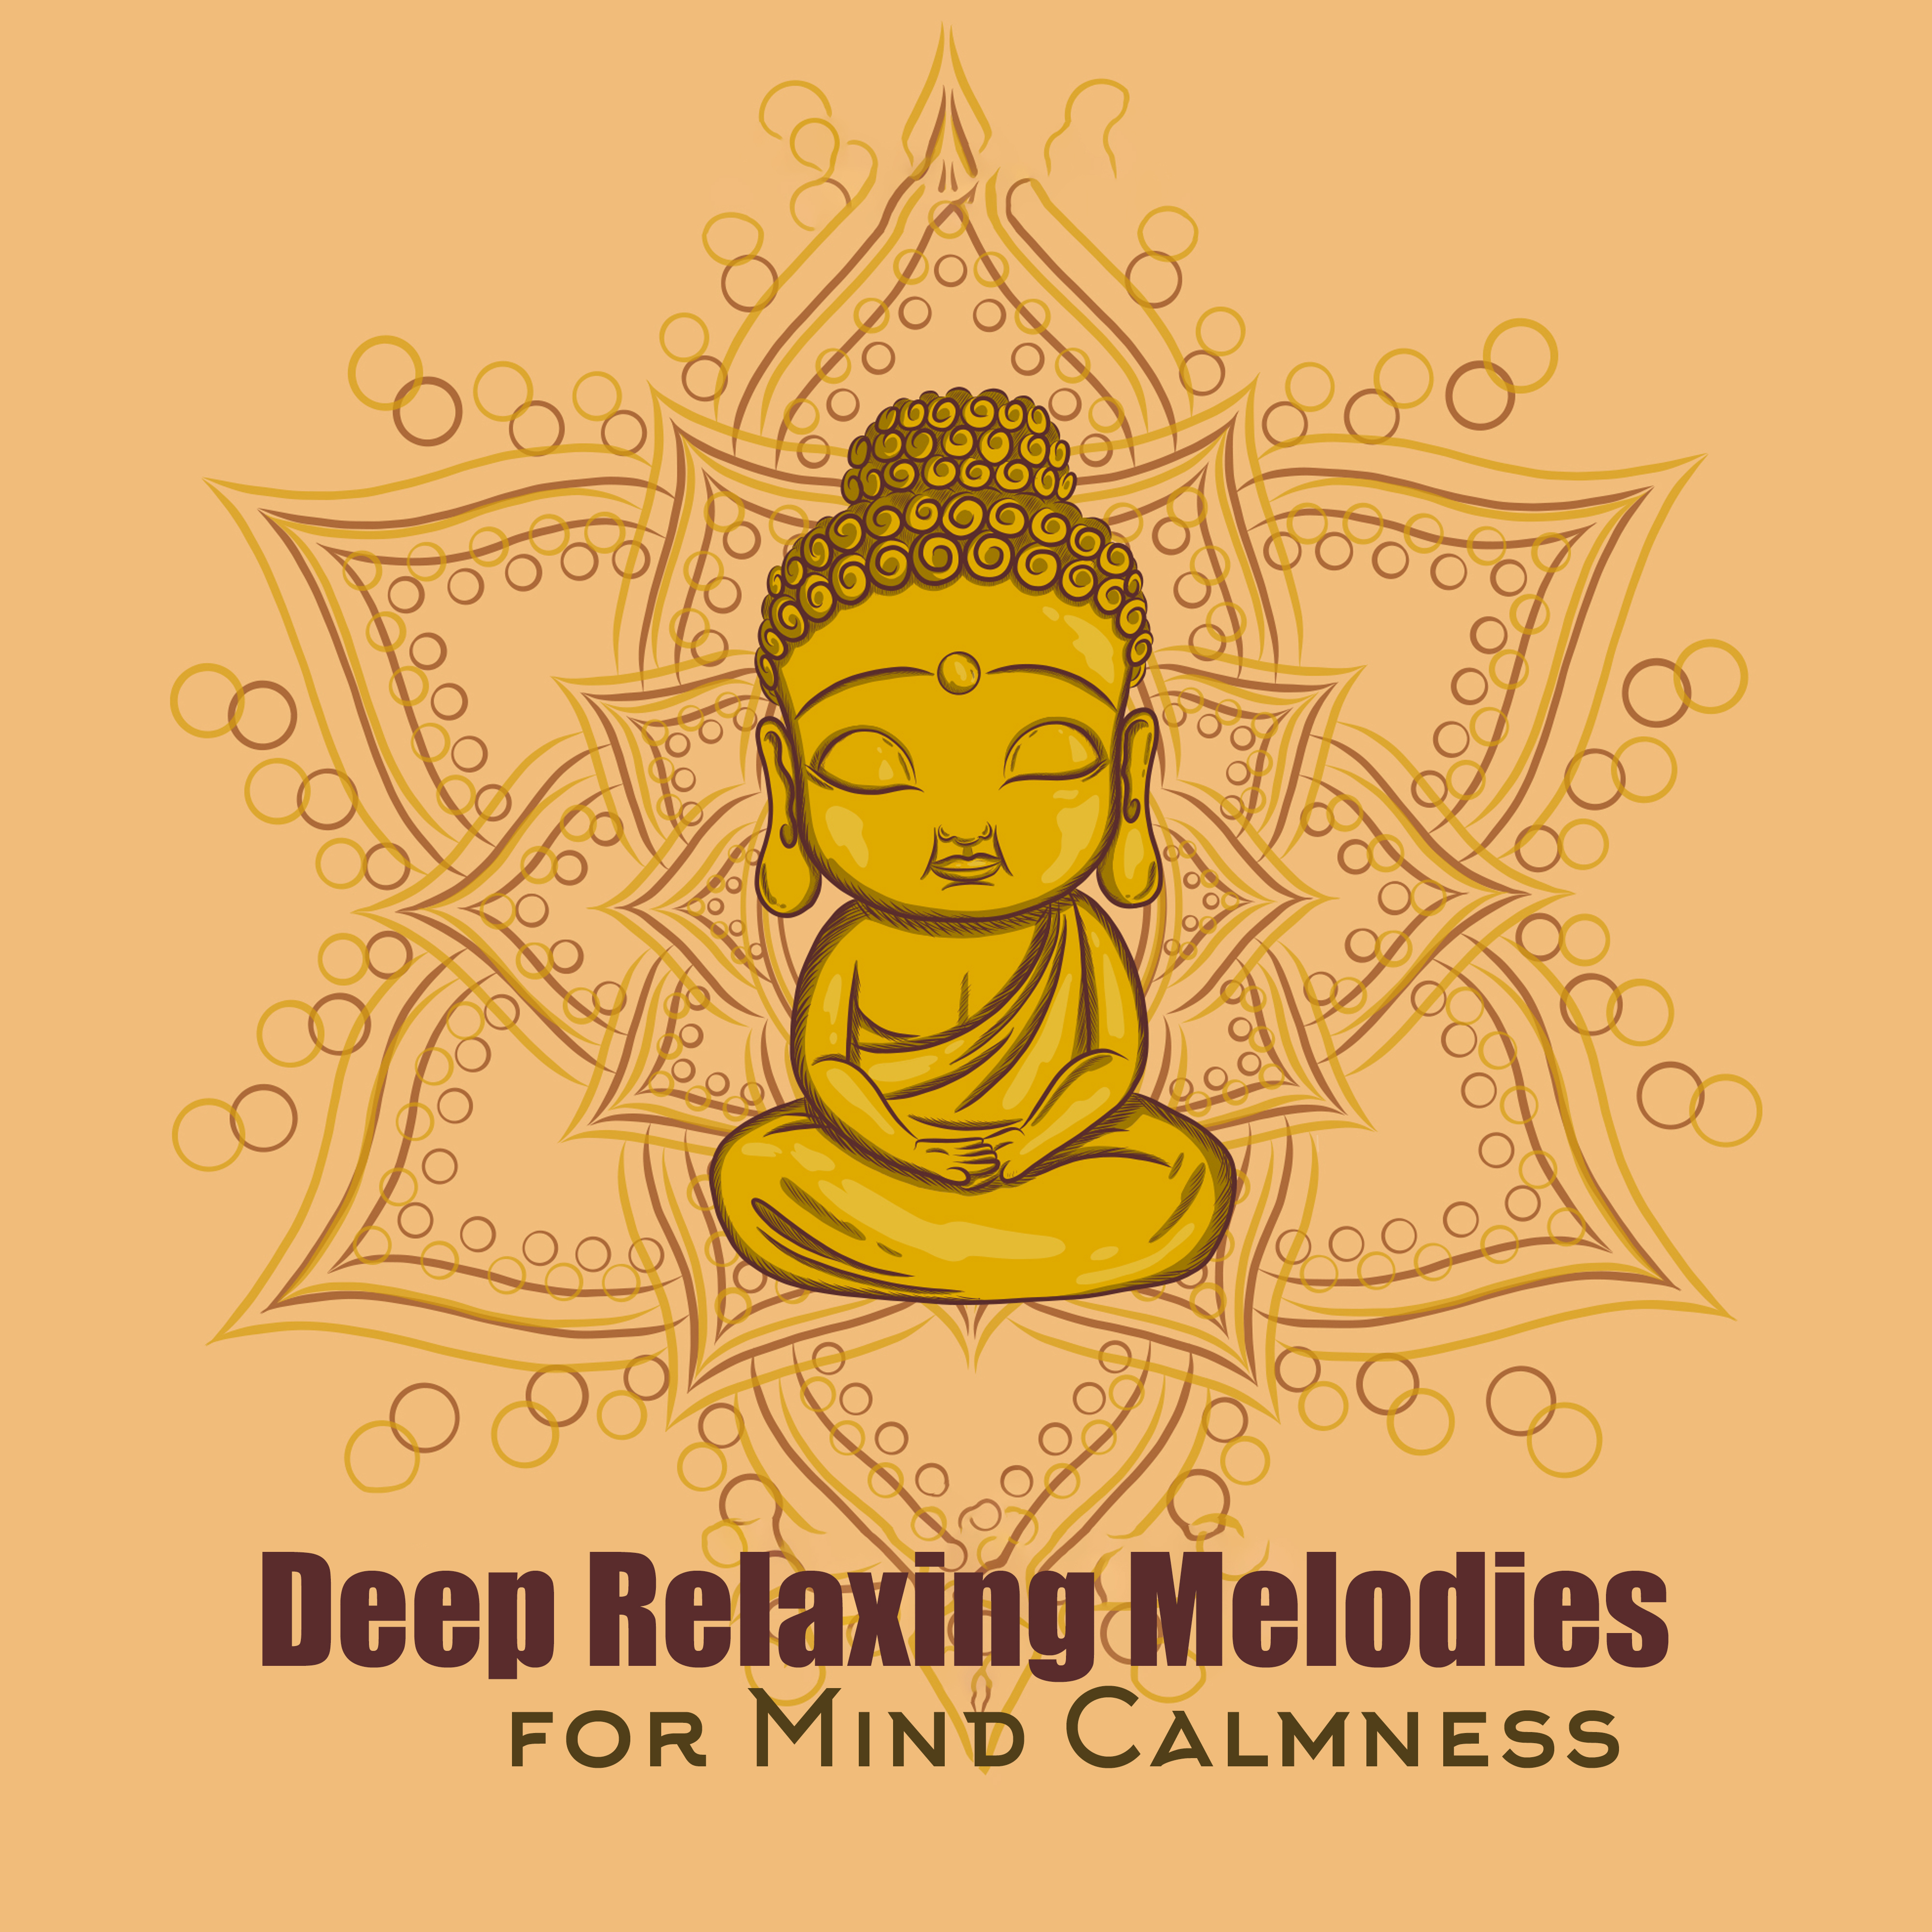 Deep Relaxing Melodies for Mind Calmness